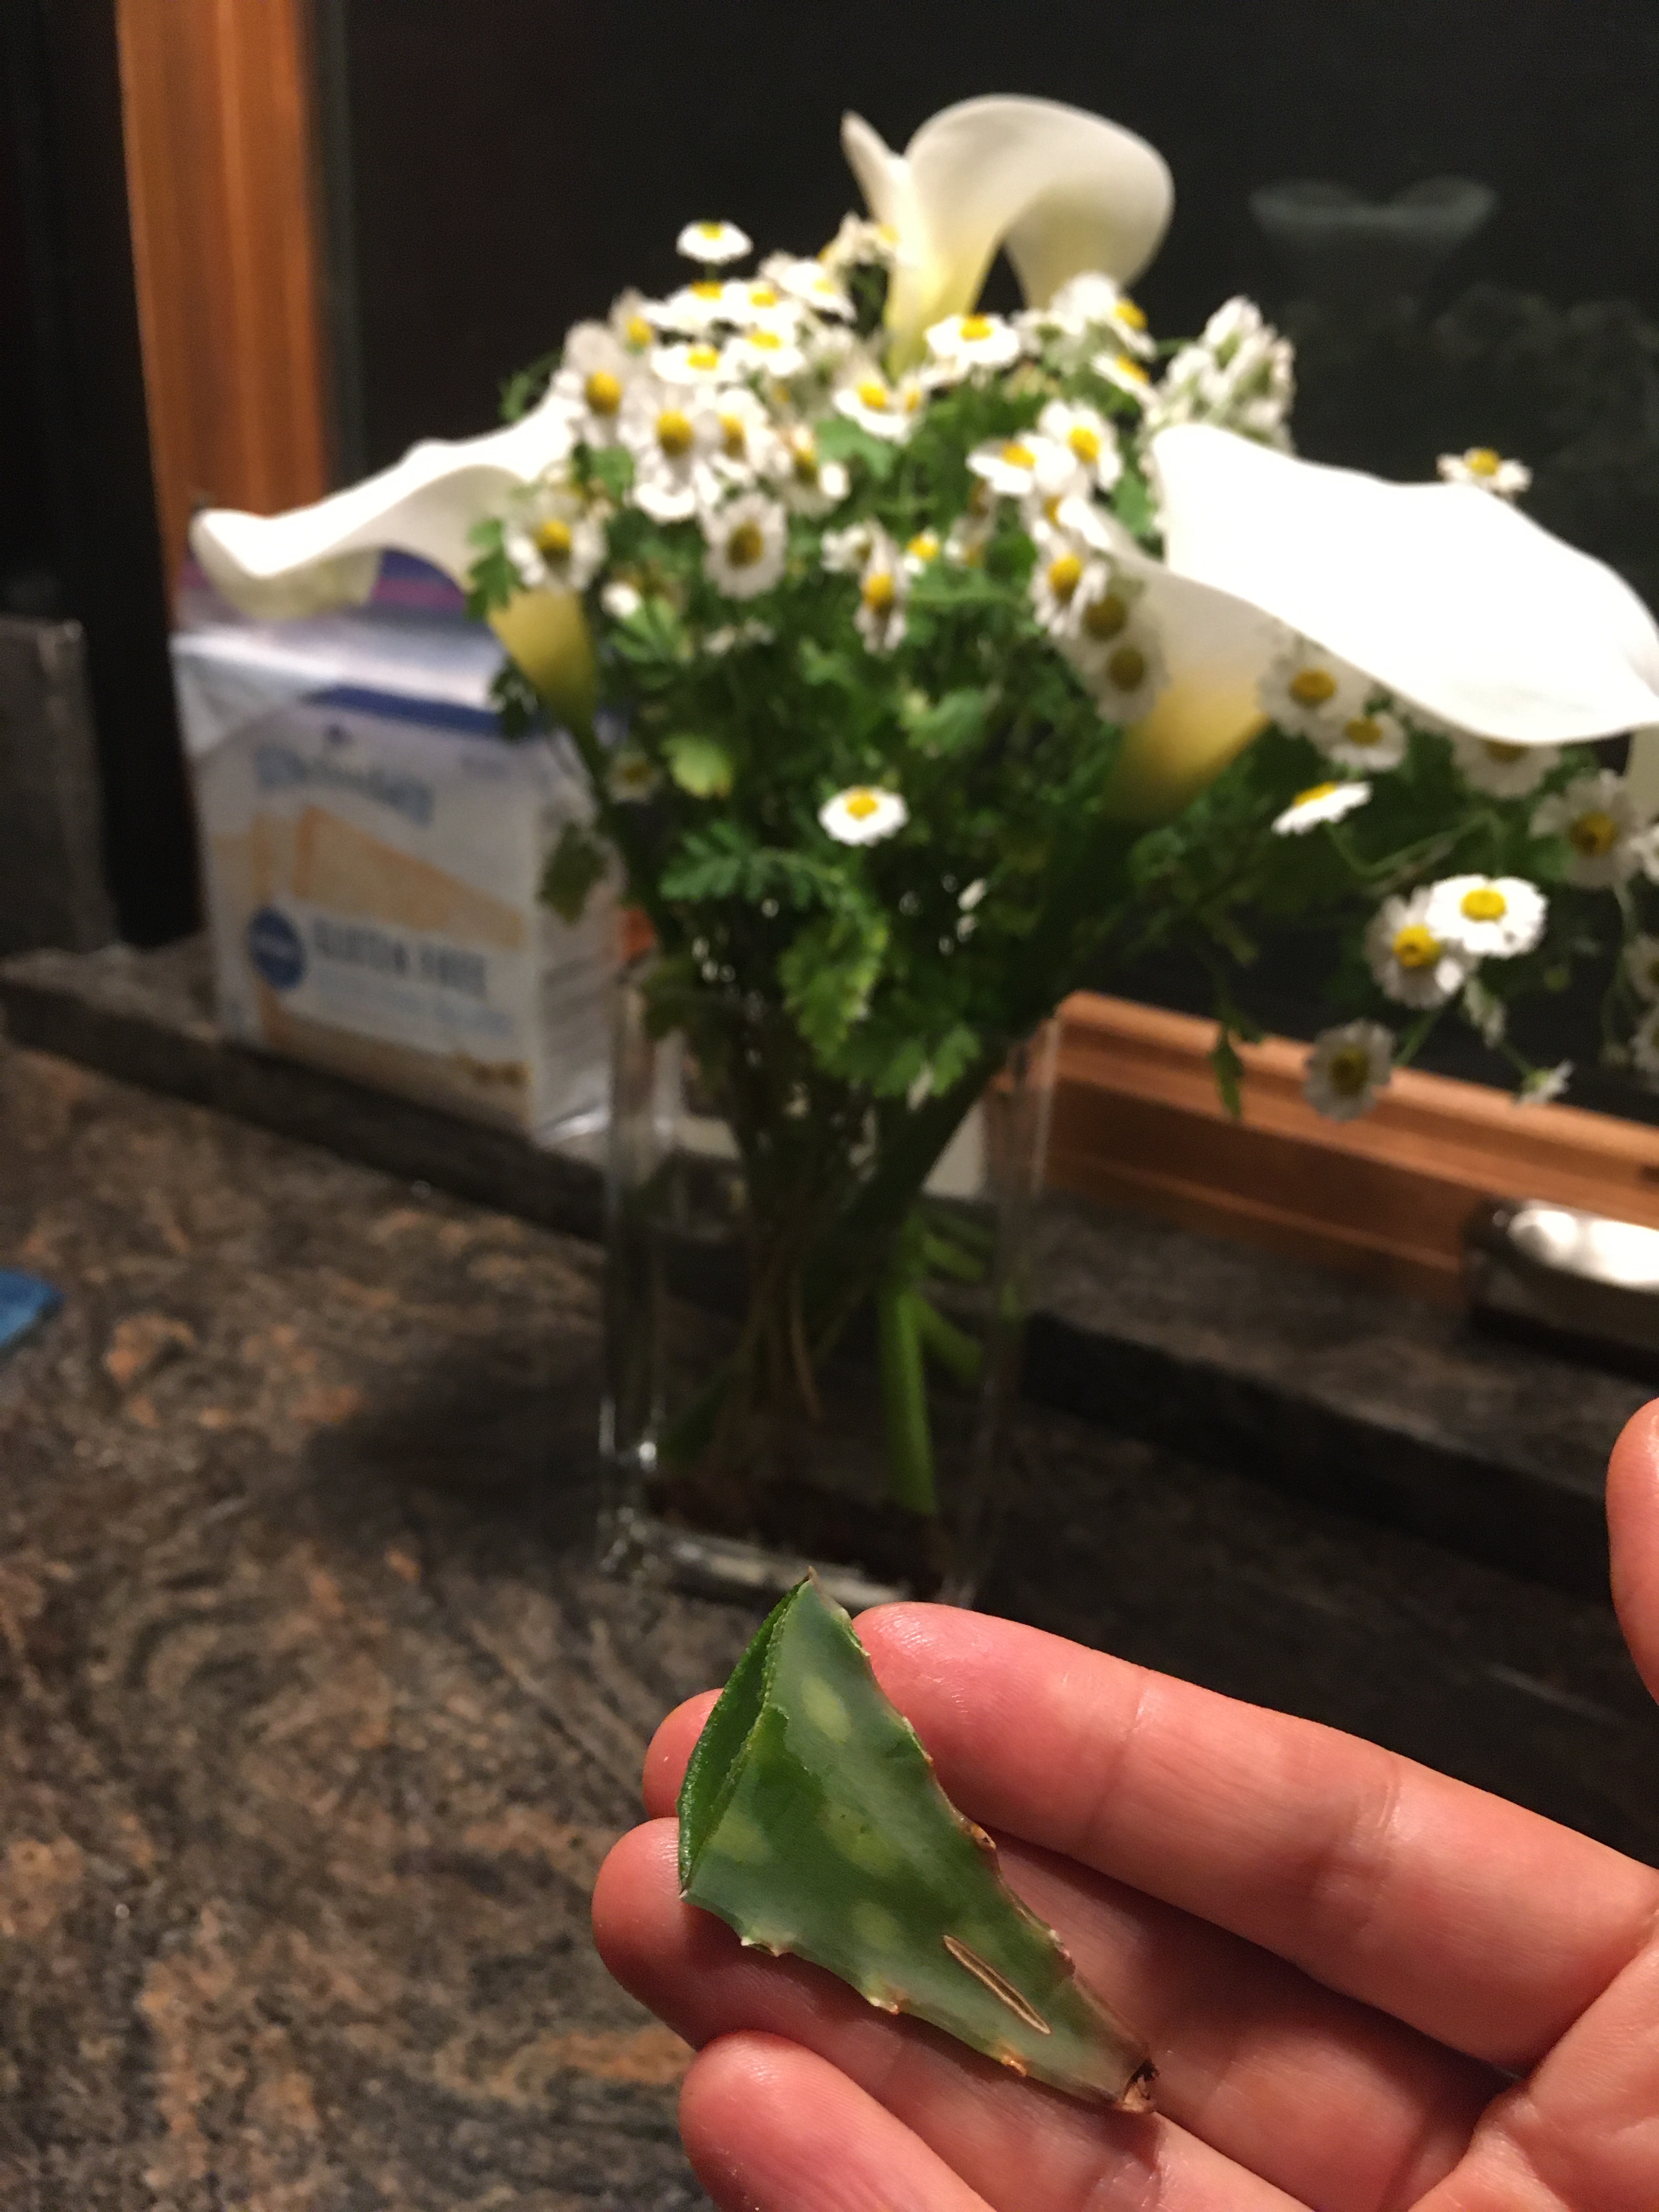 Photo of my hand holding a piece of aloe in the foreground, with a background of a black countertop including a vase with white flowers.